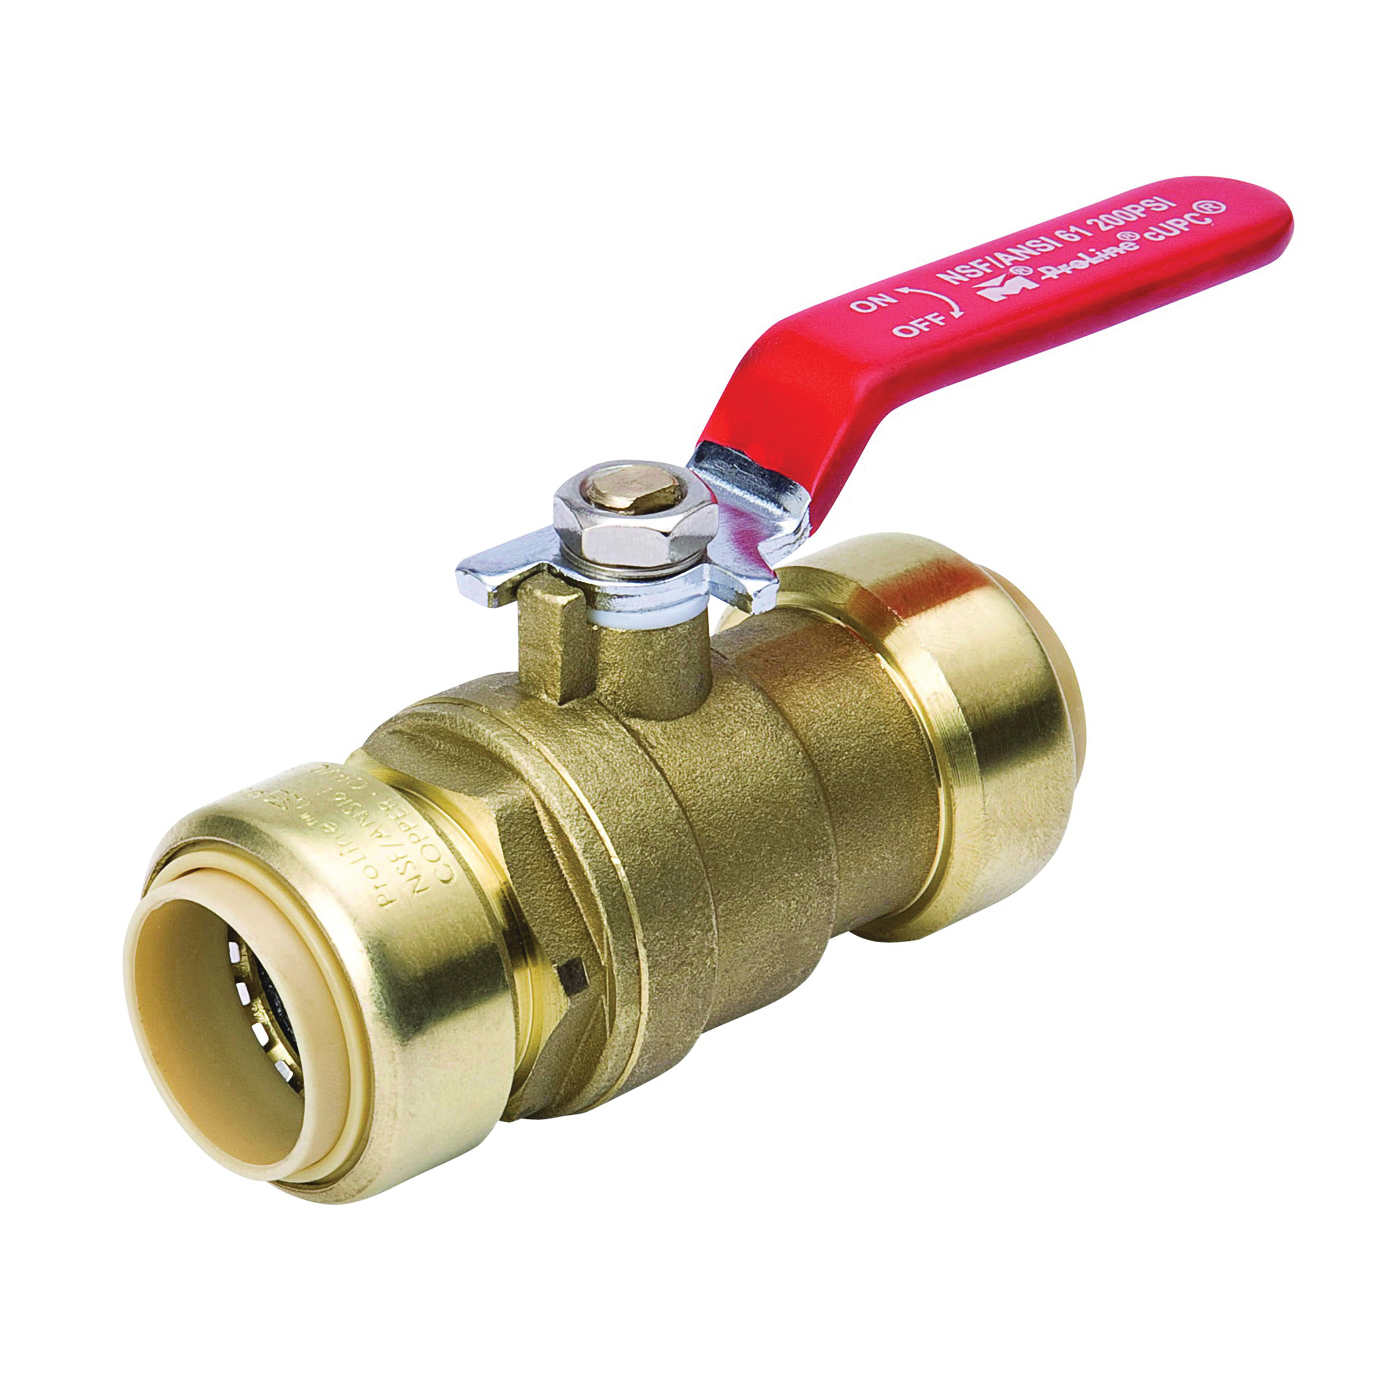 107-065HC Ball Valve, 1 in Connection, Push-Fit, 200 psi Pressure, Manual Actuator, Brass Body